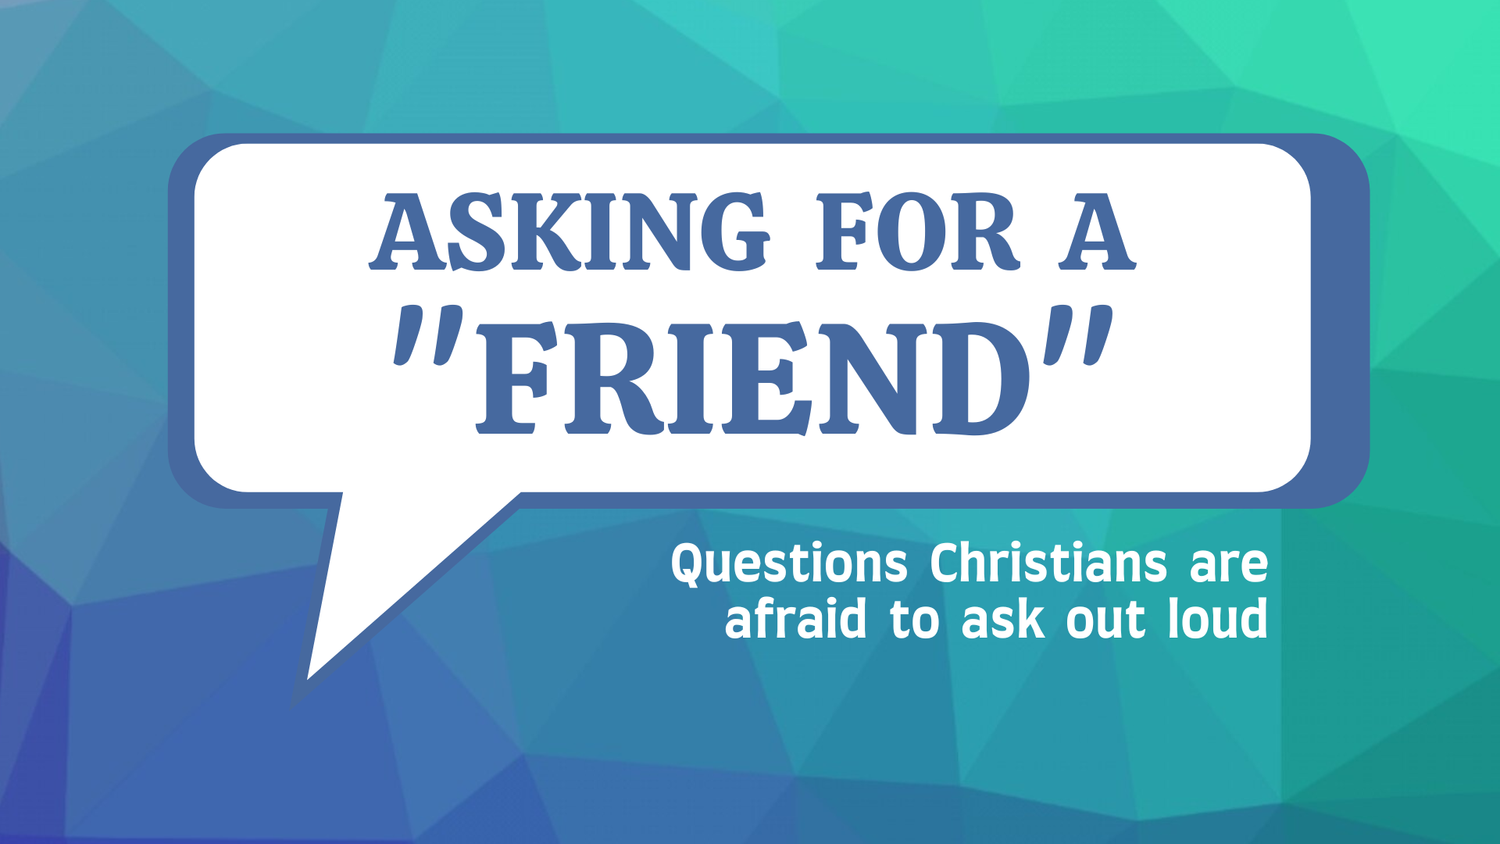 Asking For A Friend - What if a friend or family member is same-sex attracted?